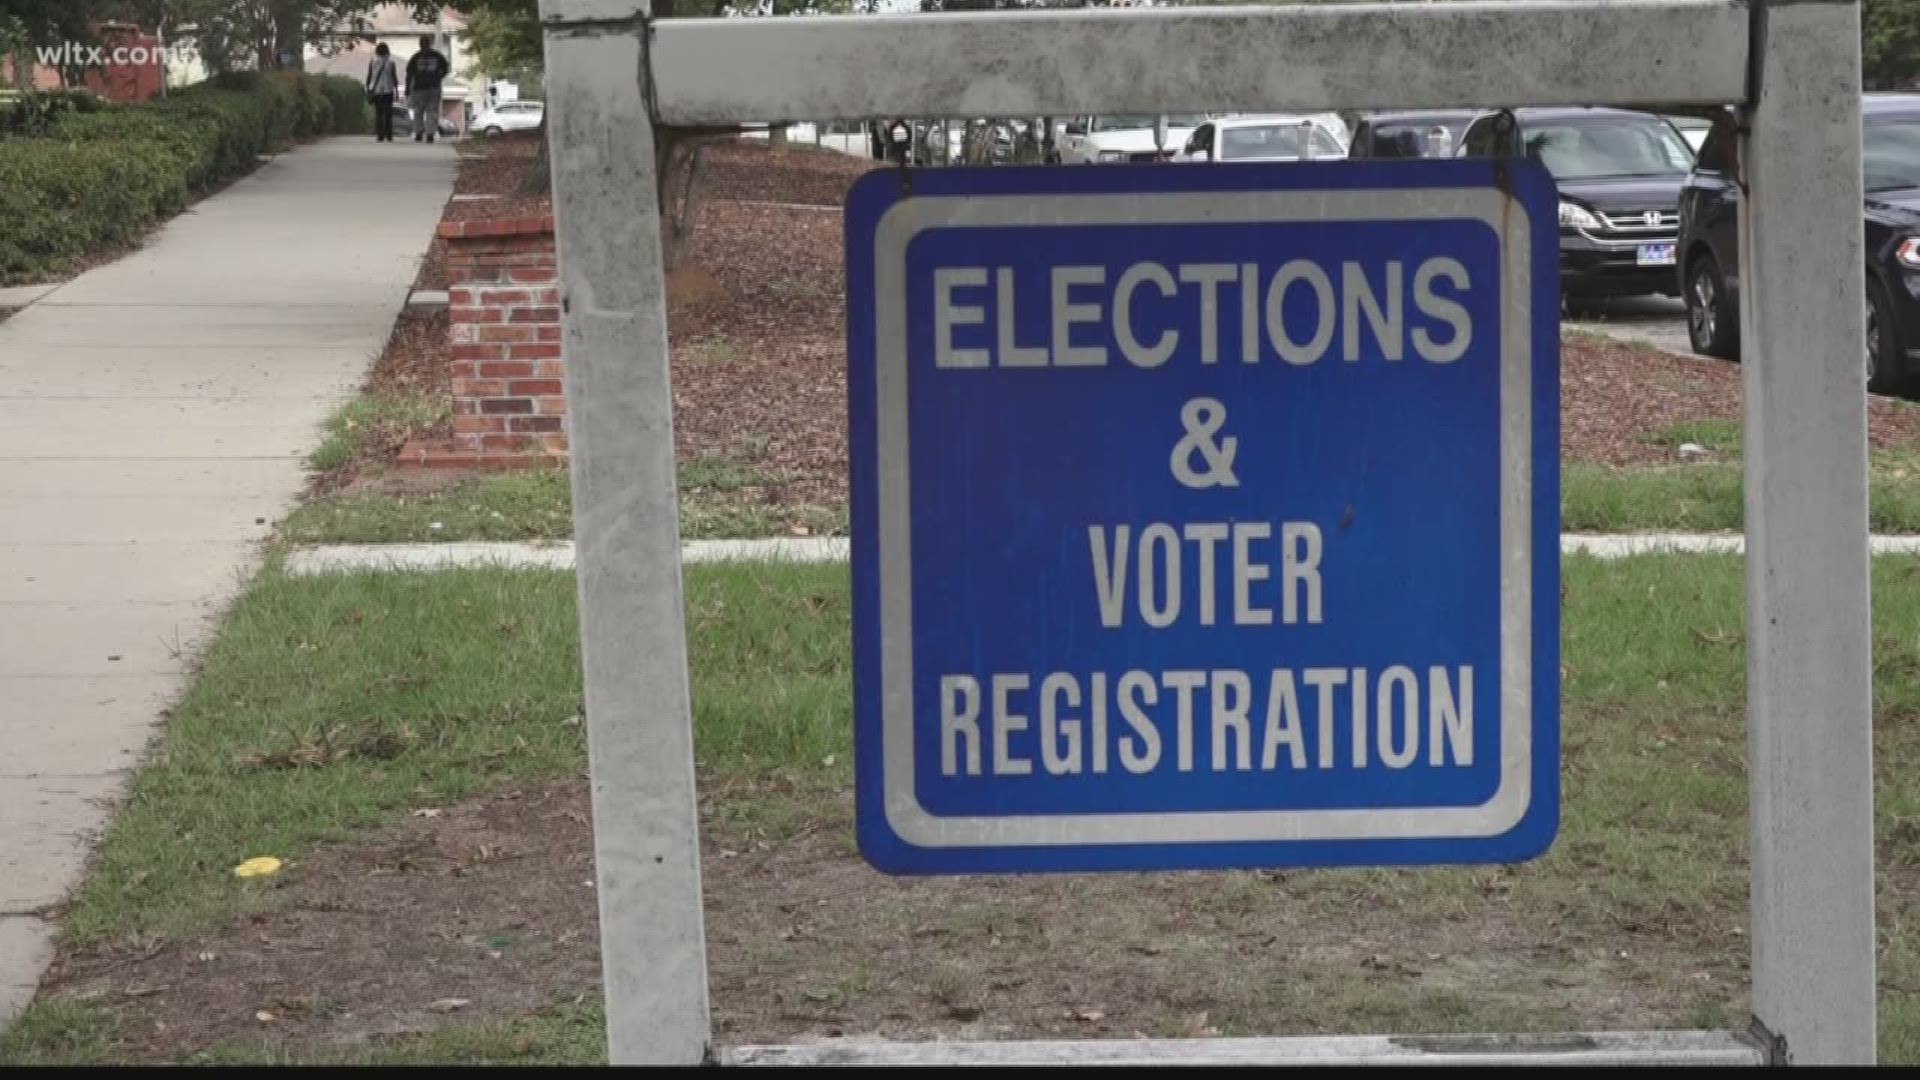 In advance of the highly anticipated midterm elections, it seems more people are signing up to register to vote.